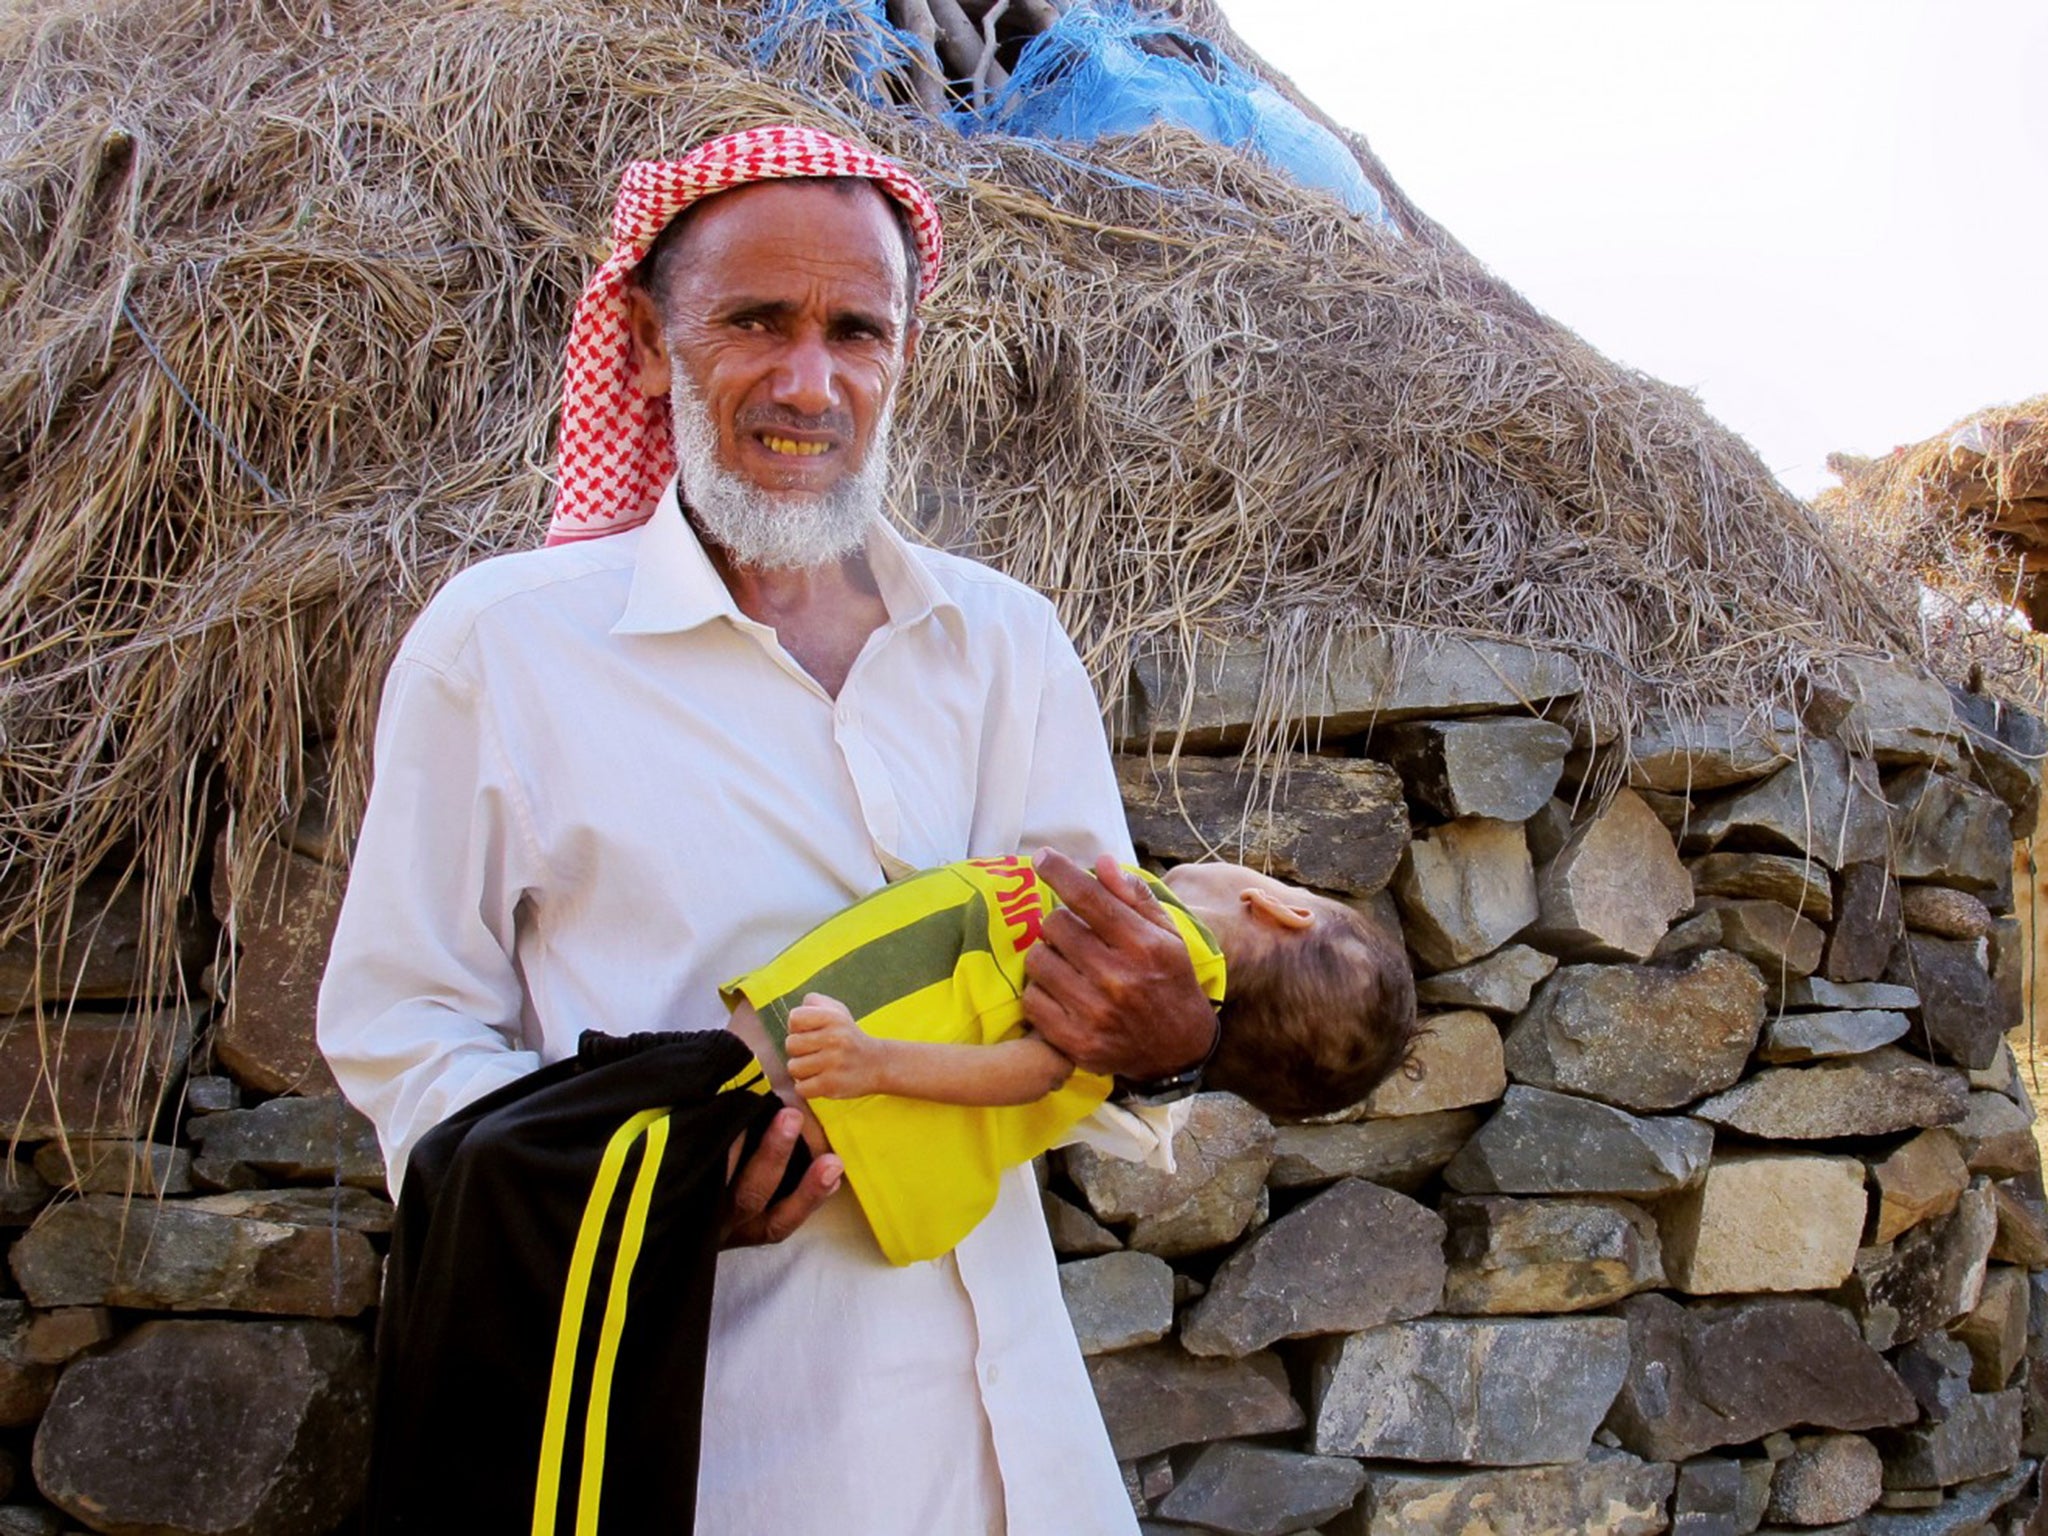 Ahmed Sadek carries his two-year-old grandson, Osama Hassan, in the mountainous area of Bani Saifan, where their village is located. Osama is suffering from severe malnutrition, but his family cannot afford to send him to a hospital